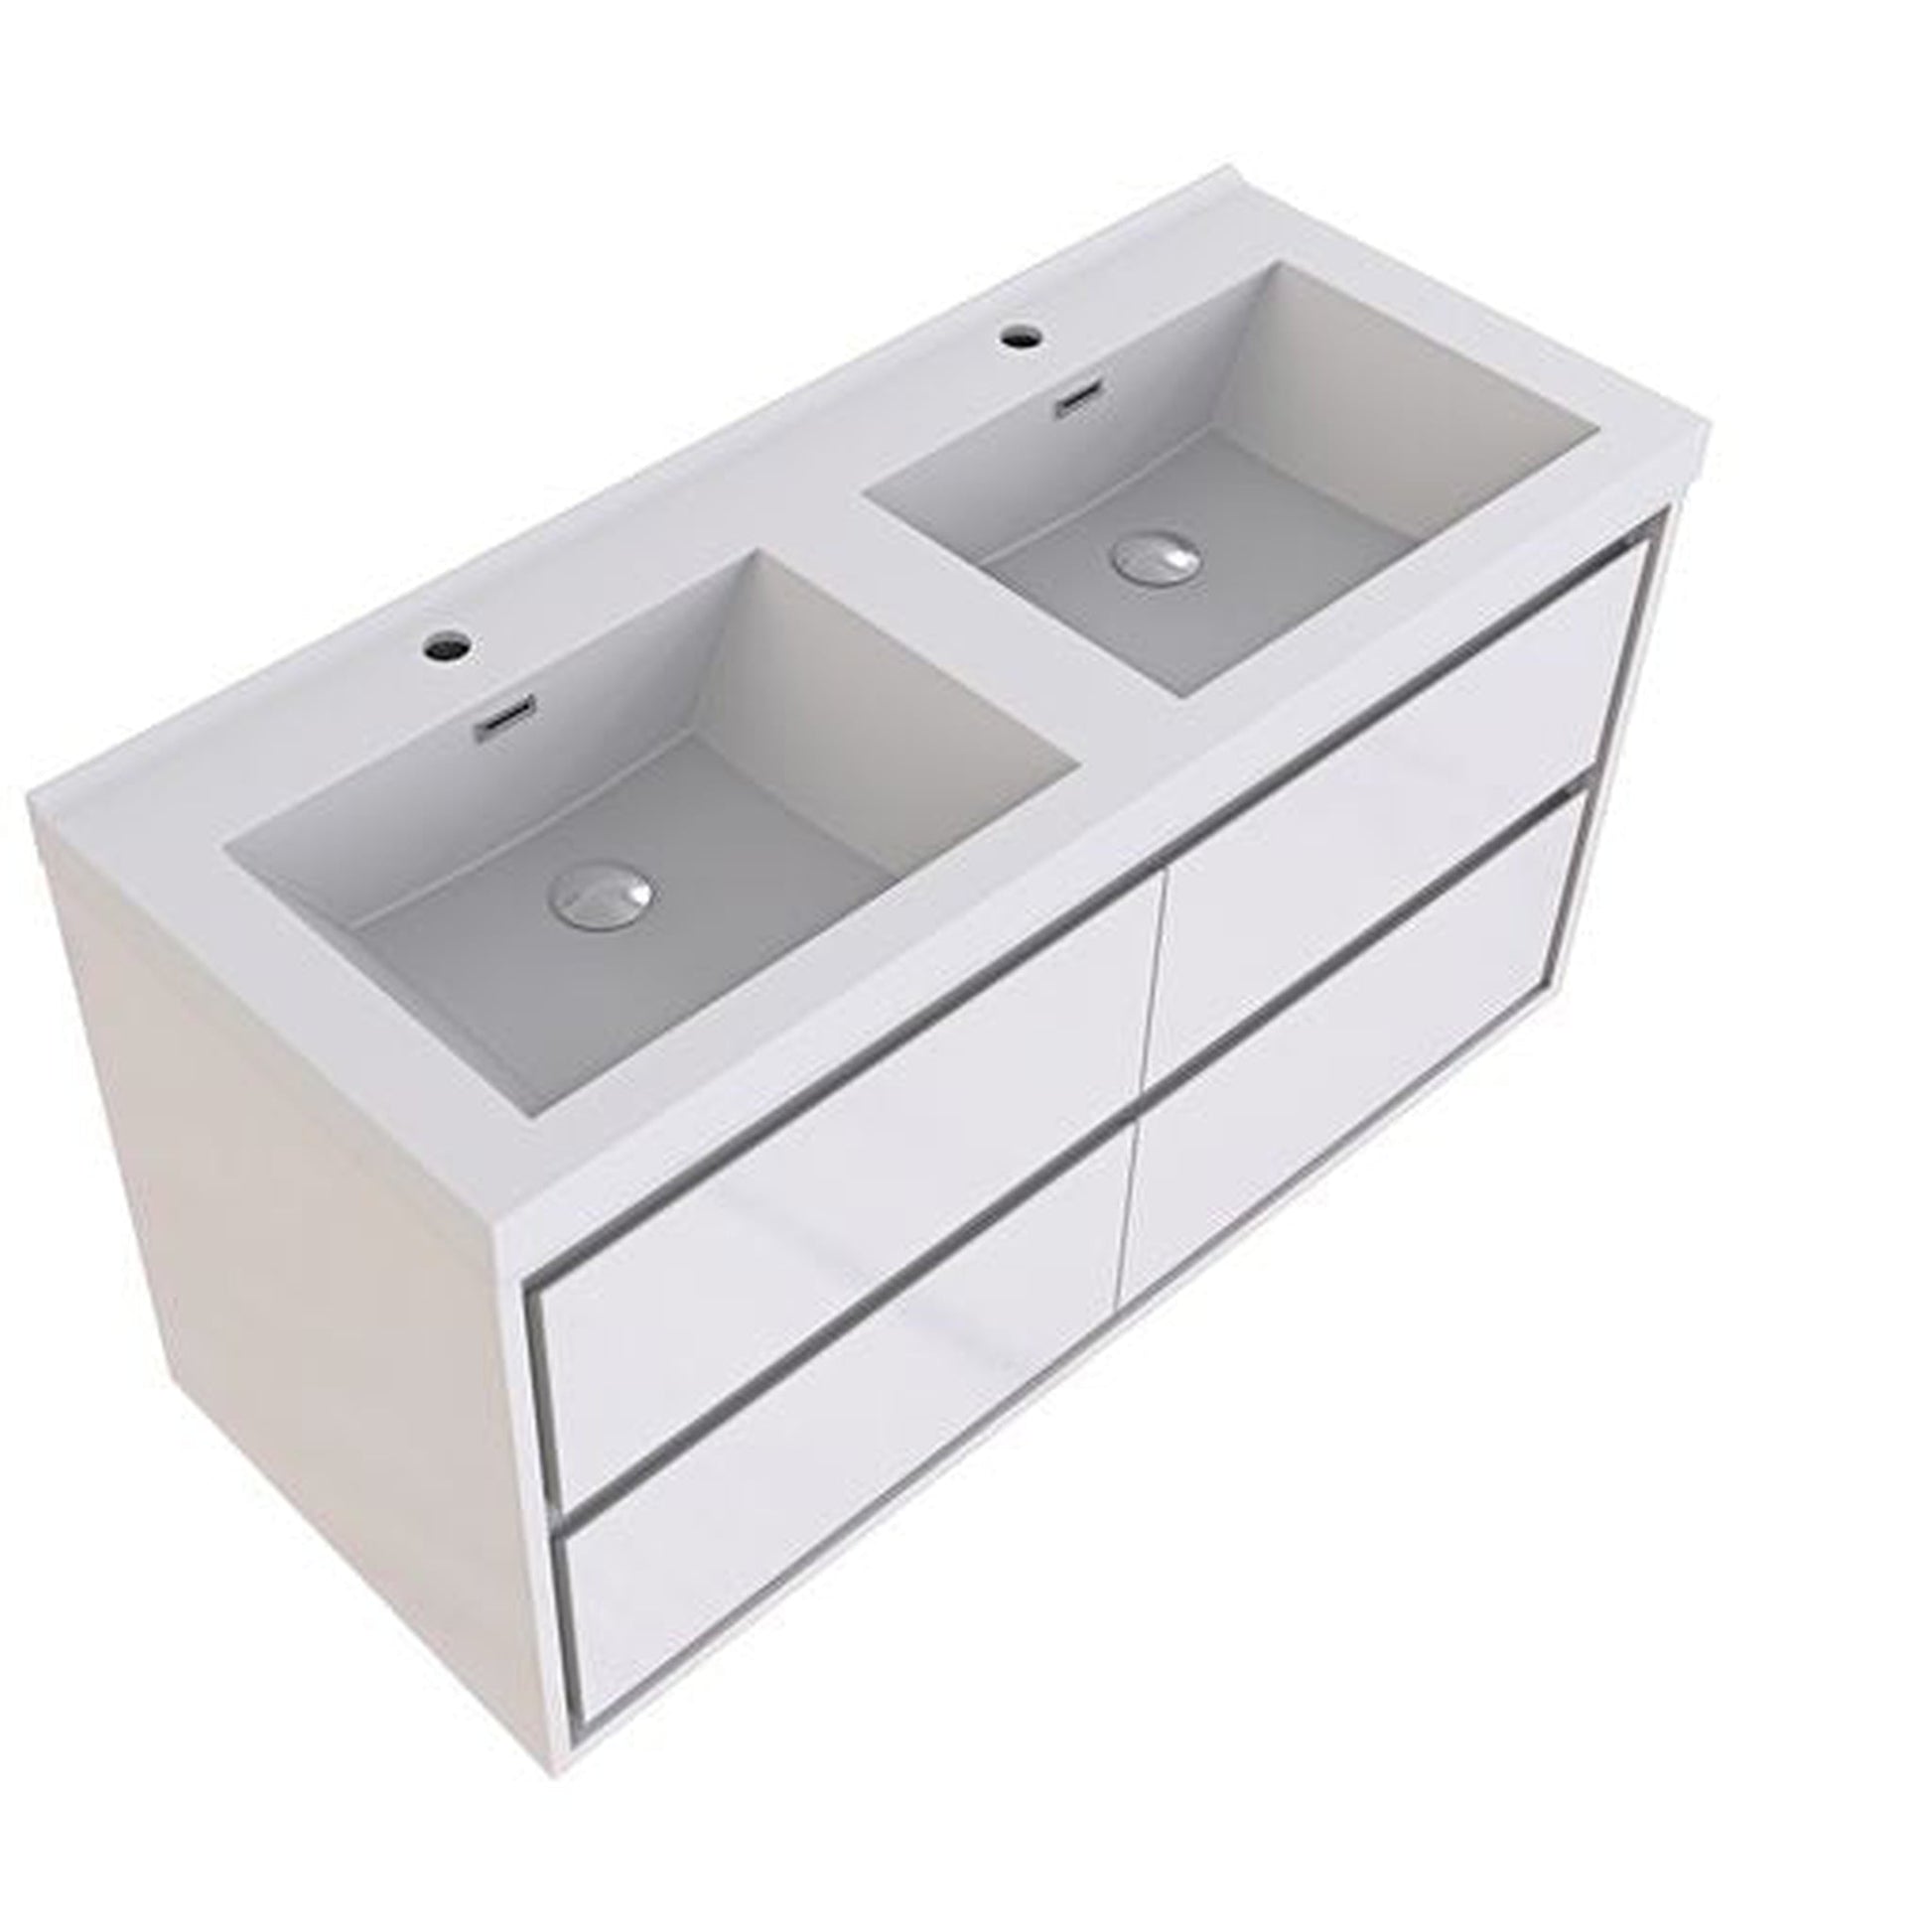 Moreno Bath Sage 48" High Gloss White Wall-Mounted Modern Vanity With Double Reinforced White Acrylic Sinks